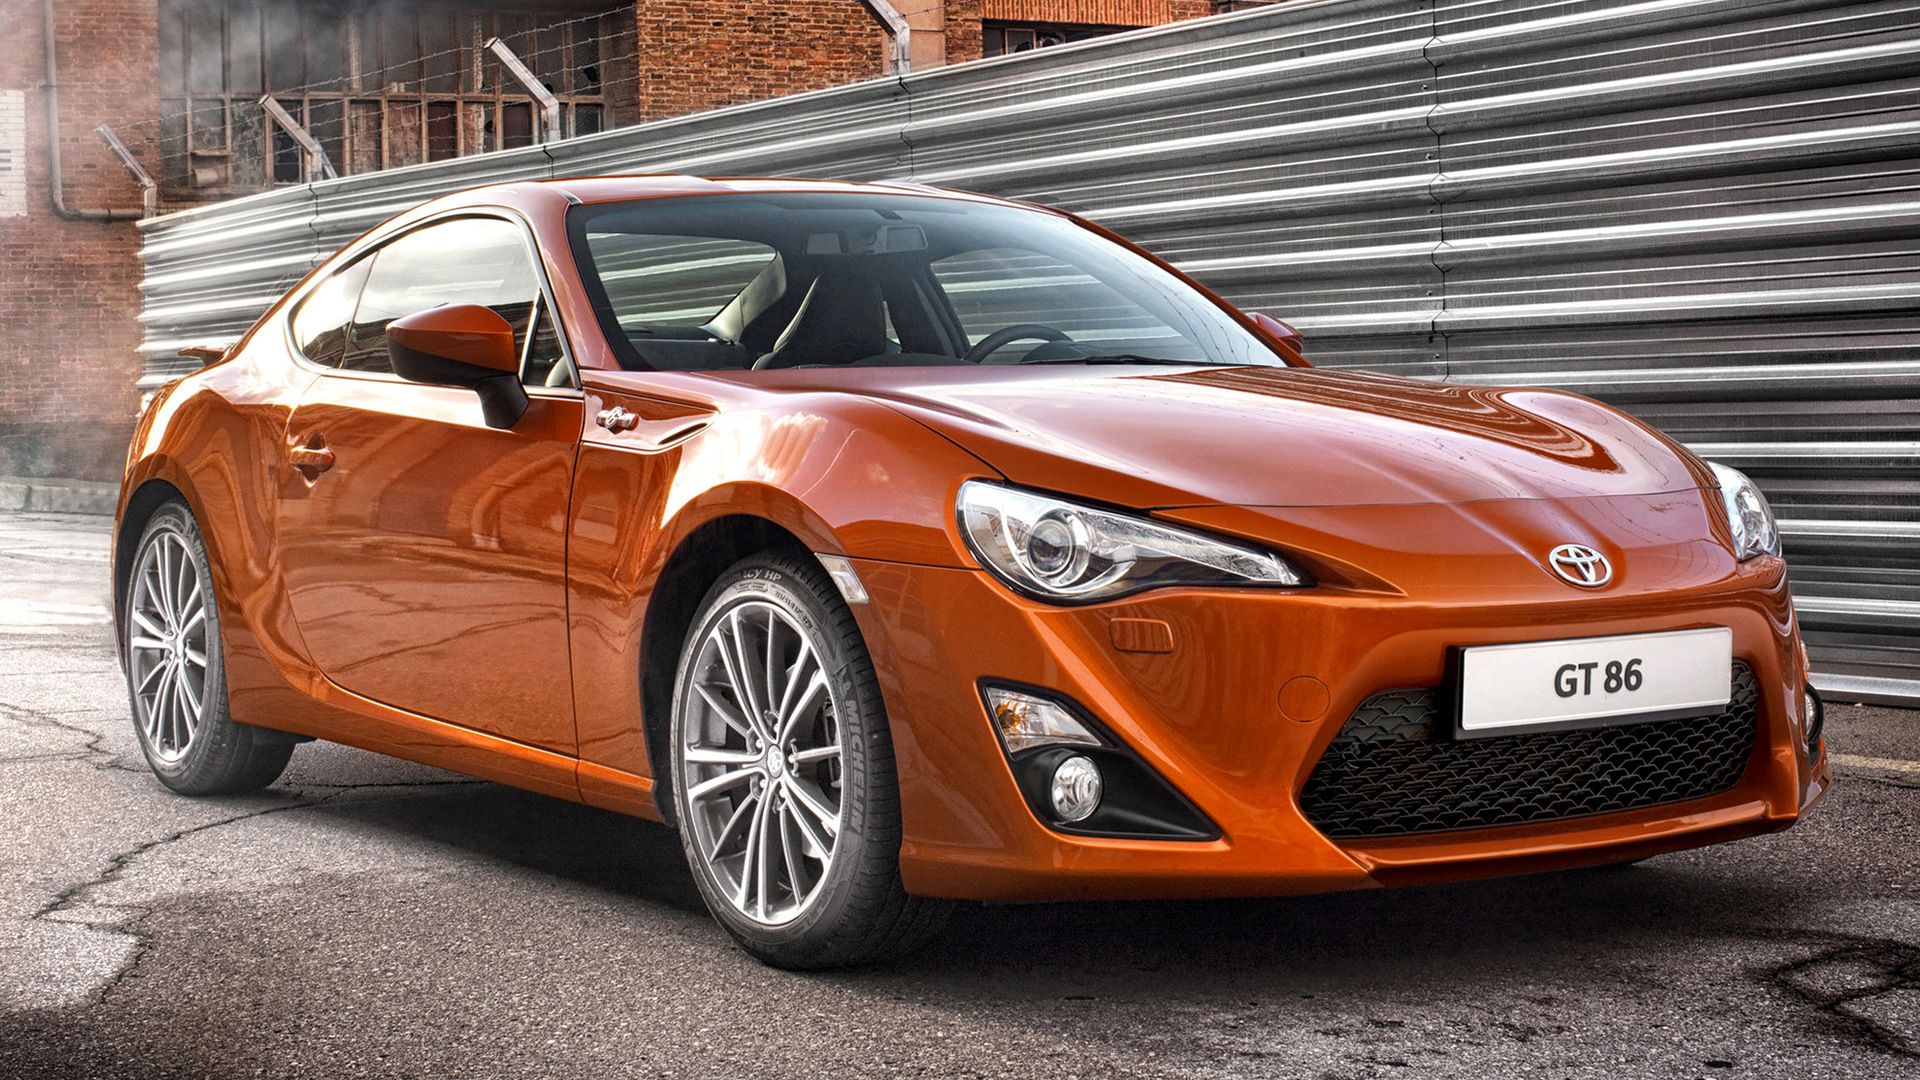 Toyota GT 86 and HD Image